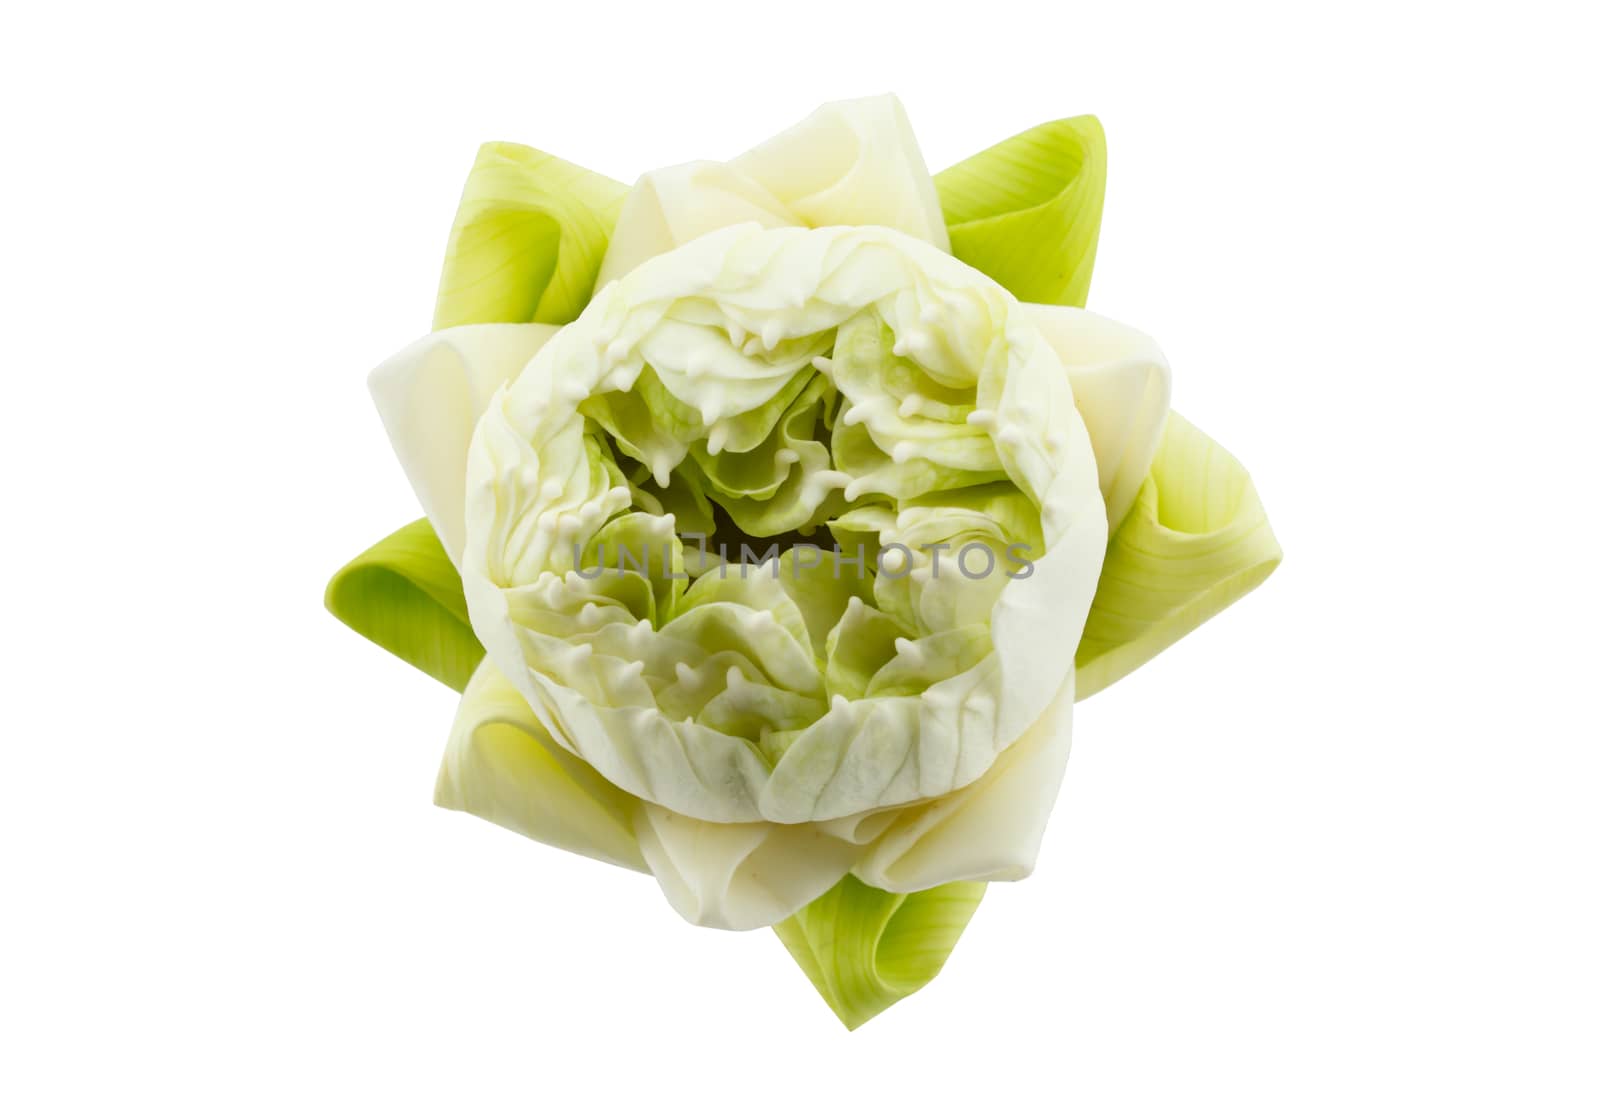 green lotus flower isolated on white background